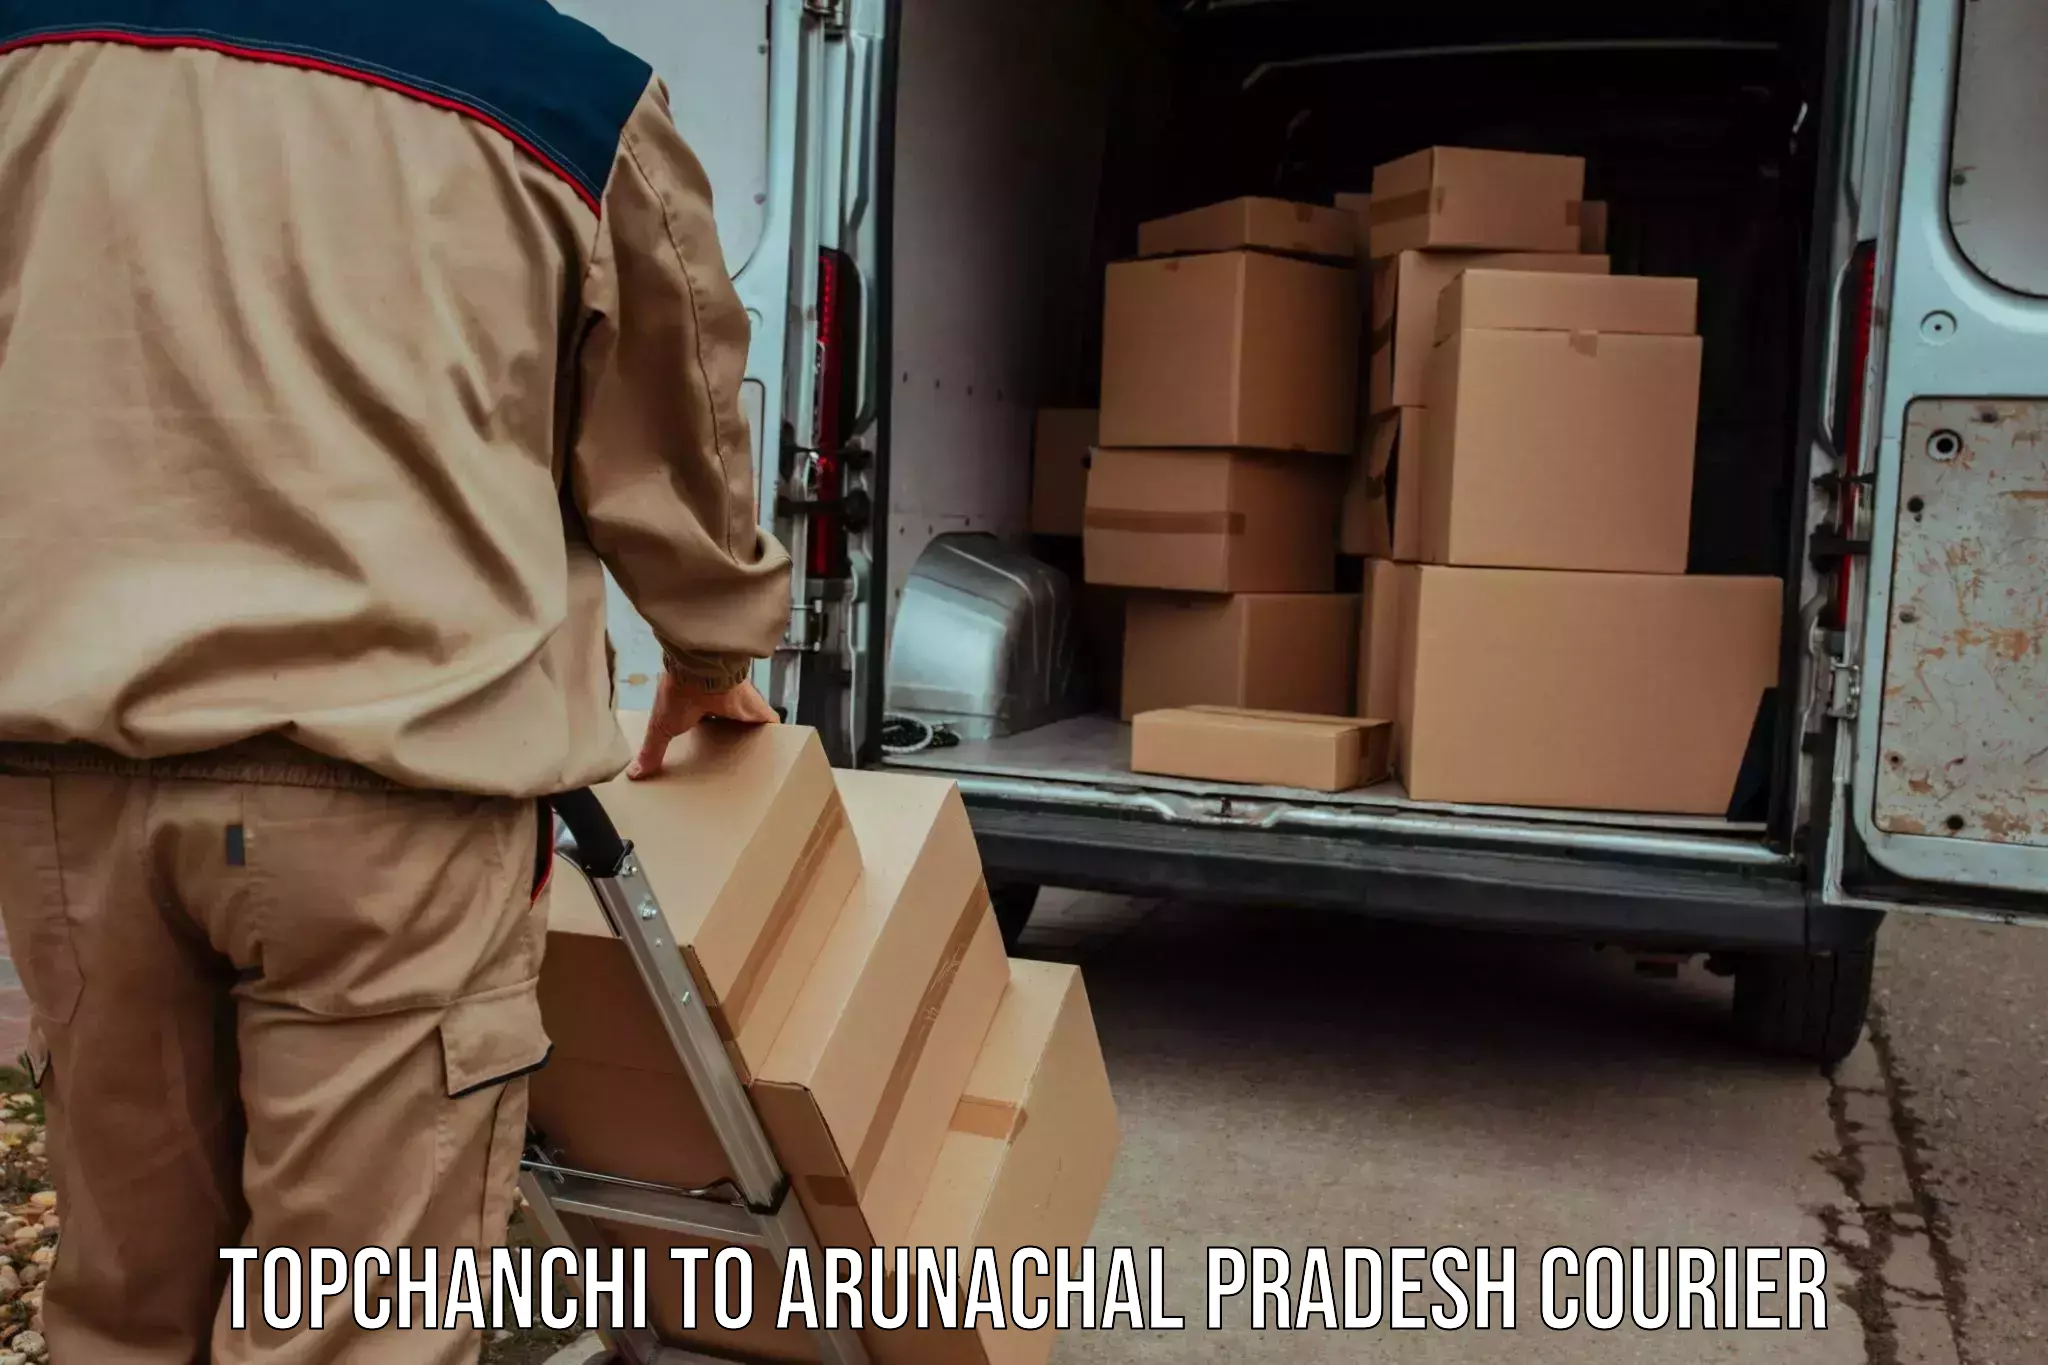 Express delivery network Topchanchi to Namsai